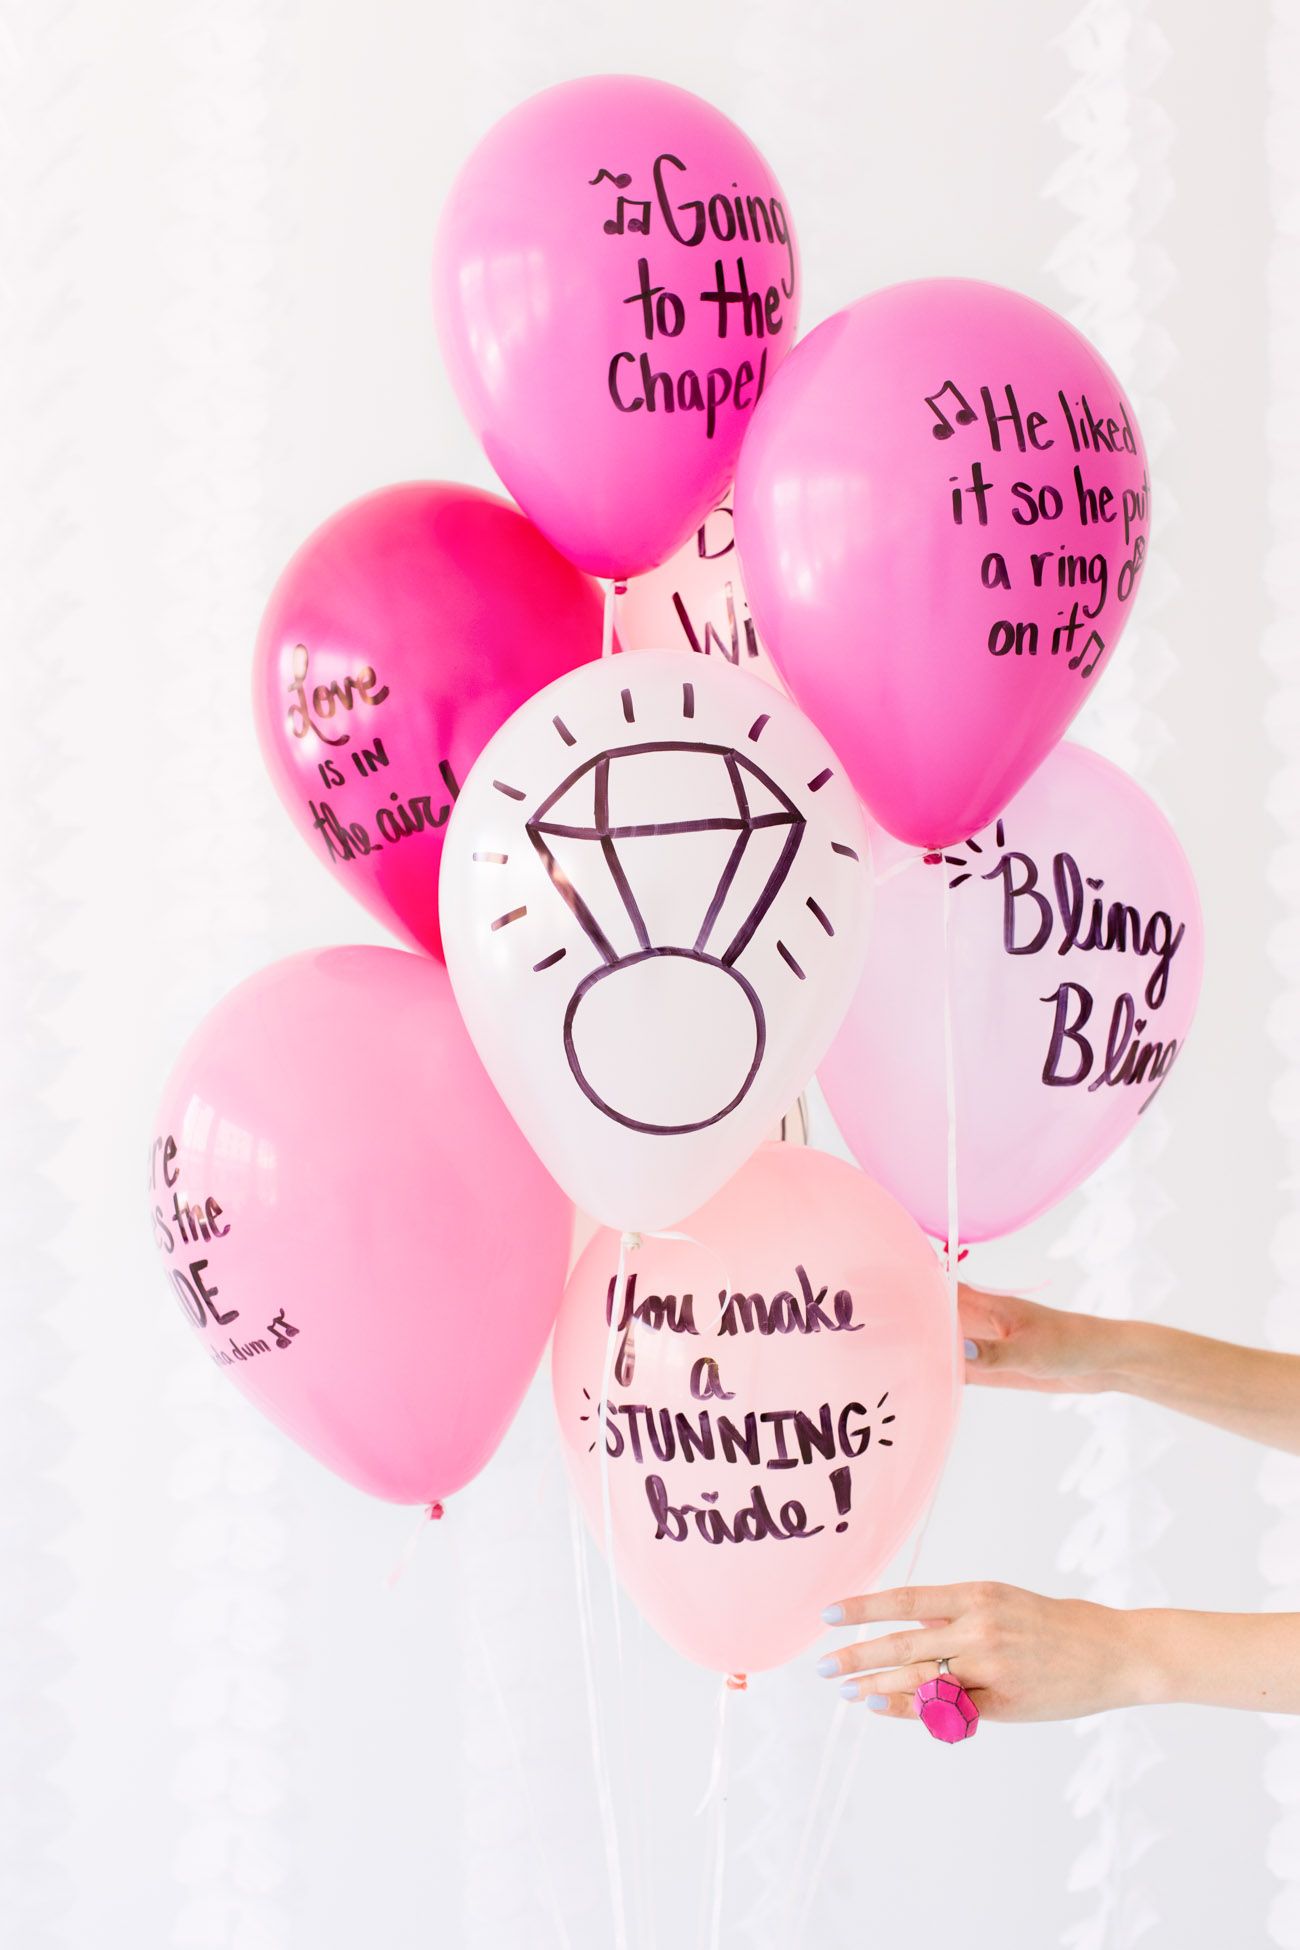 Beautiful Bridal Shower Wishes Quotes Image, Wallpaper for Friends Picture Wishes Messages SMS, Quotes, Wishes, Messages, Wordings, Lines, Status, Text Msg Picture, Sayings